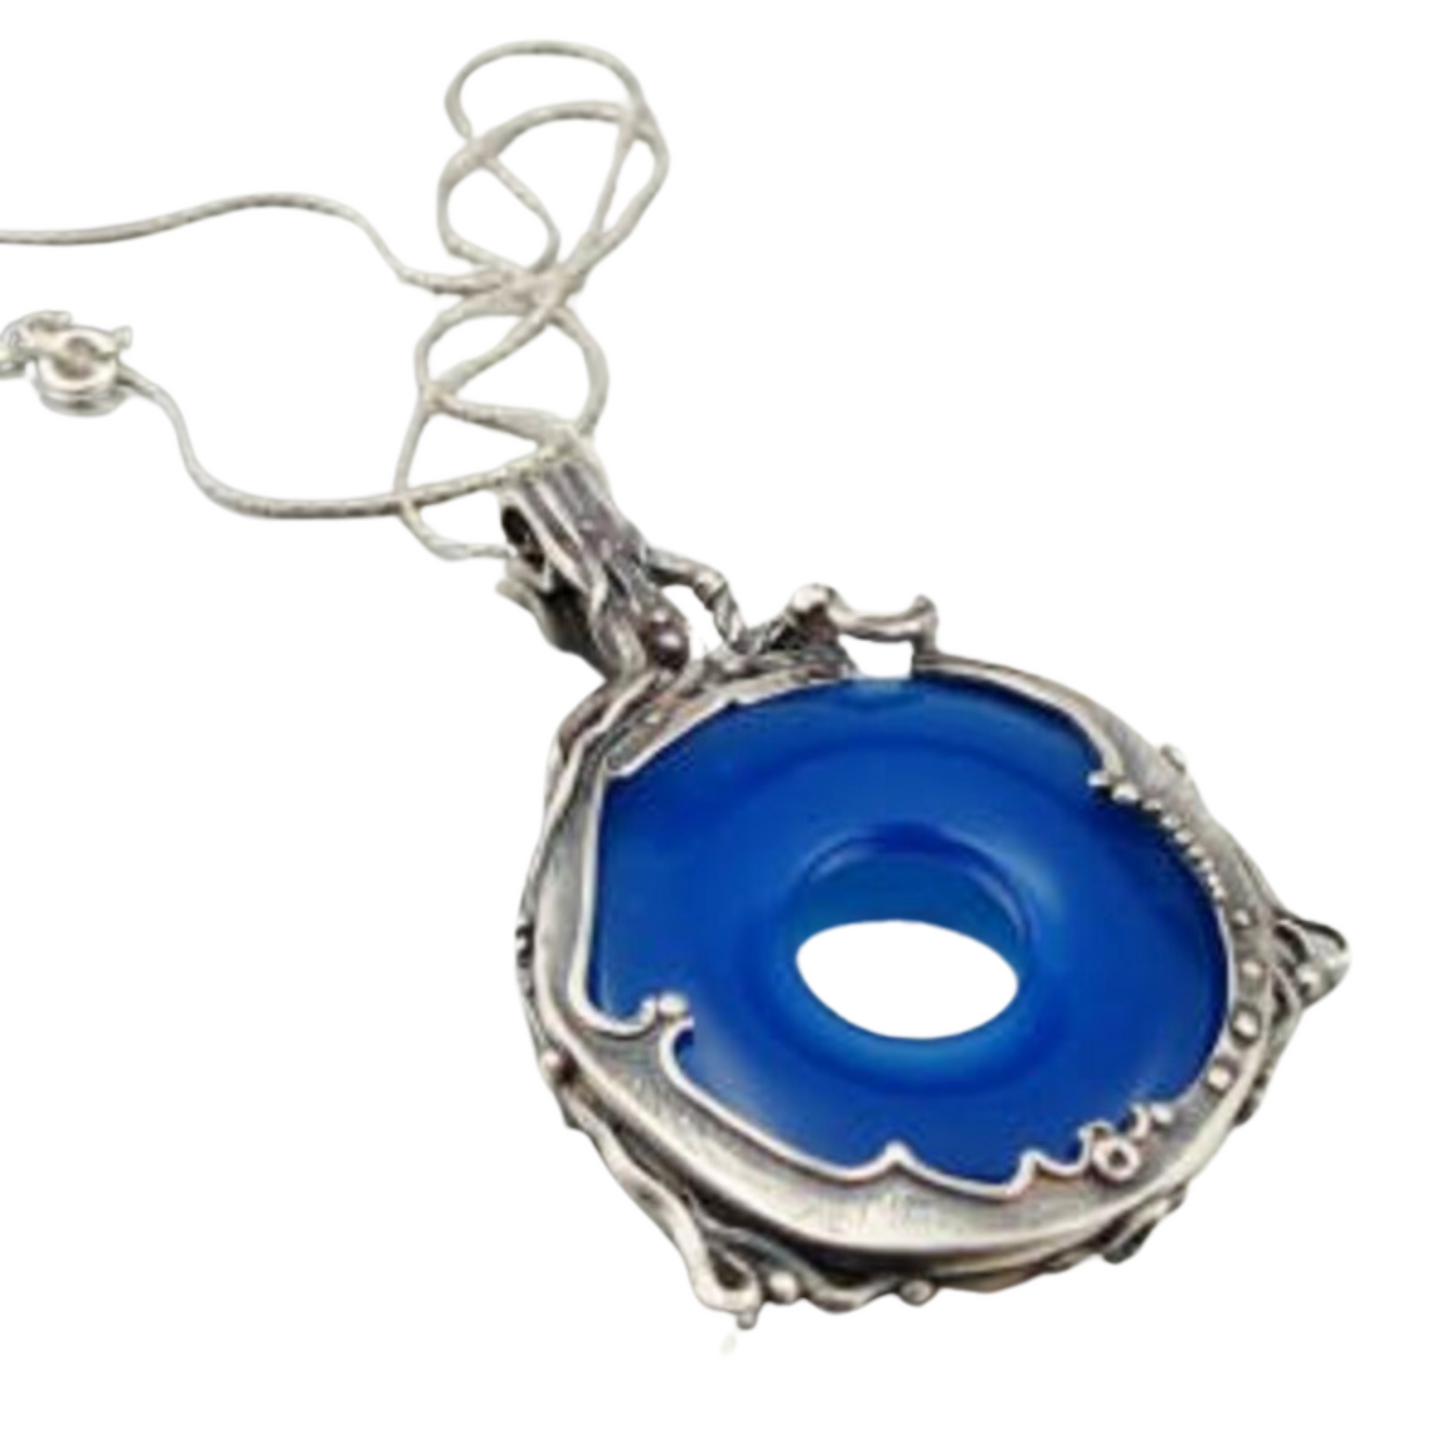 A HUGE 40mm Genuine natural Blue agate stone held by a beautiful sculpture of 925 sterling silver, Israeli jewelry, Israeli design, gift for her, unisex jewelry, unisex pendant, round blue agate pendant, boho chic jewelry, made in Israel